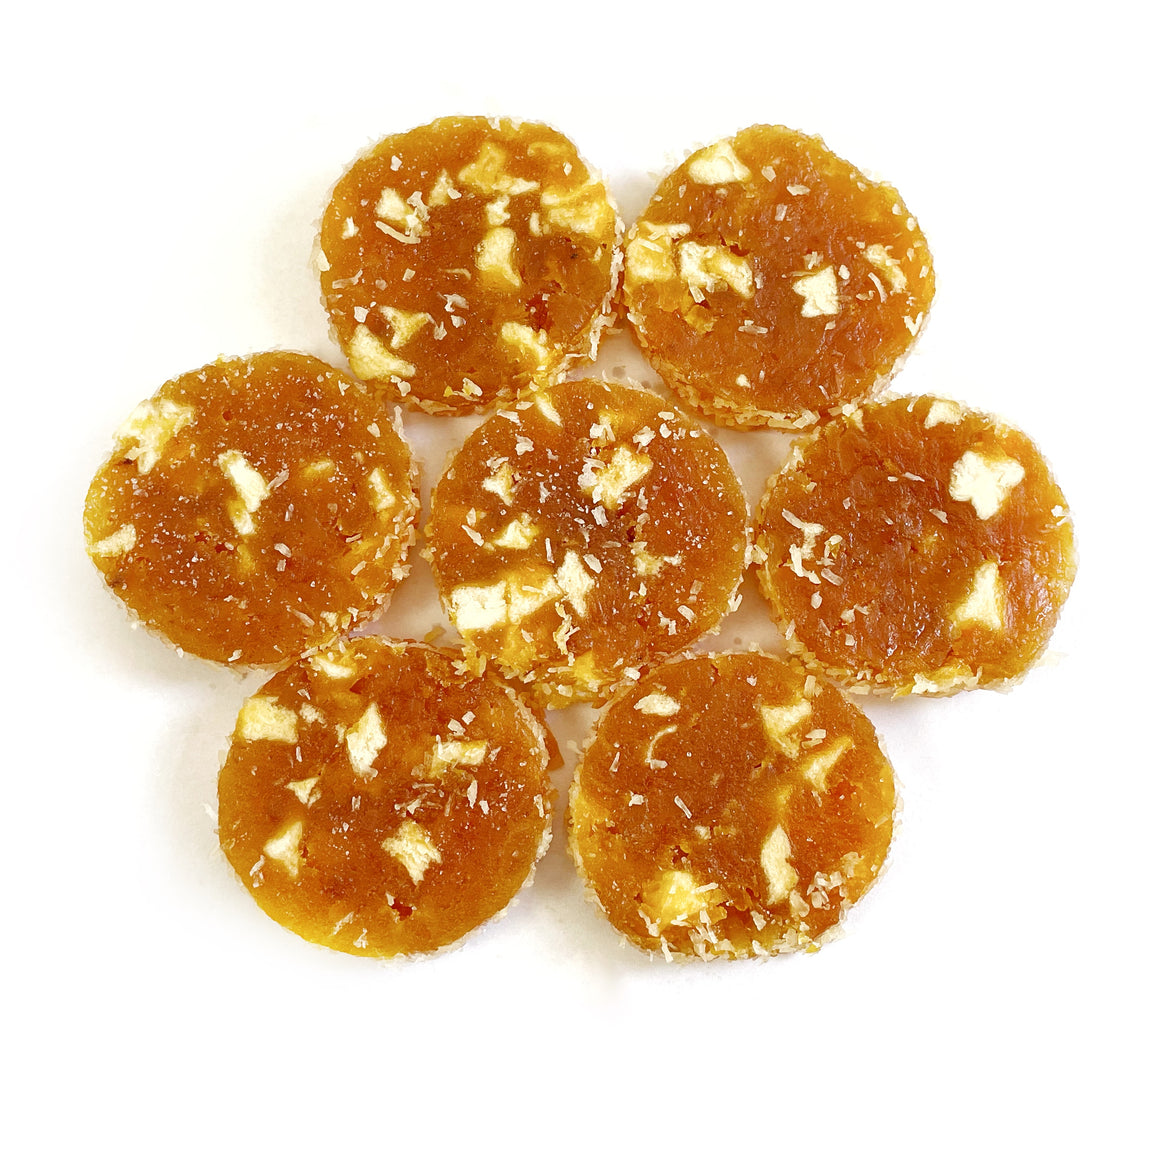 A group of Apricot & Apple Bites on a white surface.